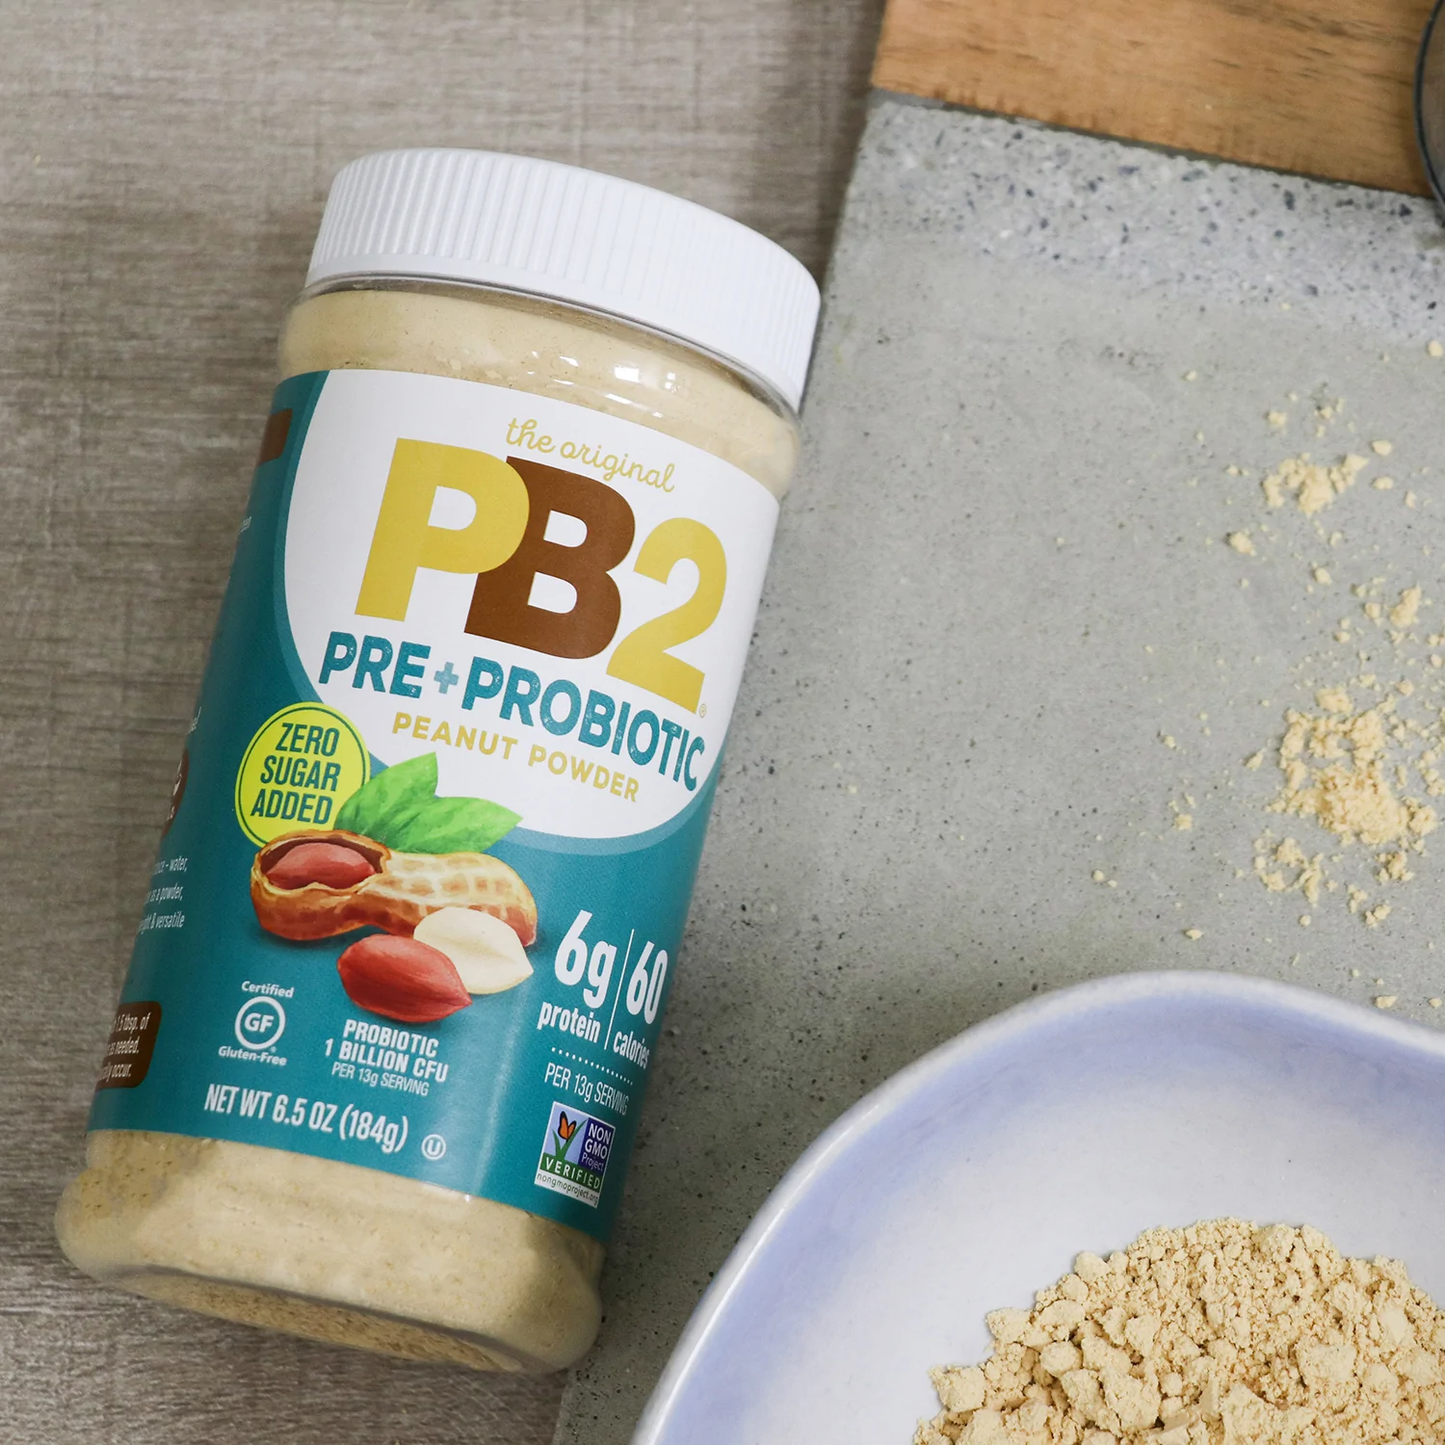 PB2 Powdered Peanut Butter 184g, The Pre+Probiotic Flavour